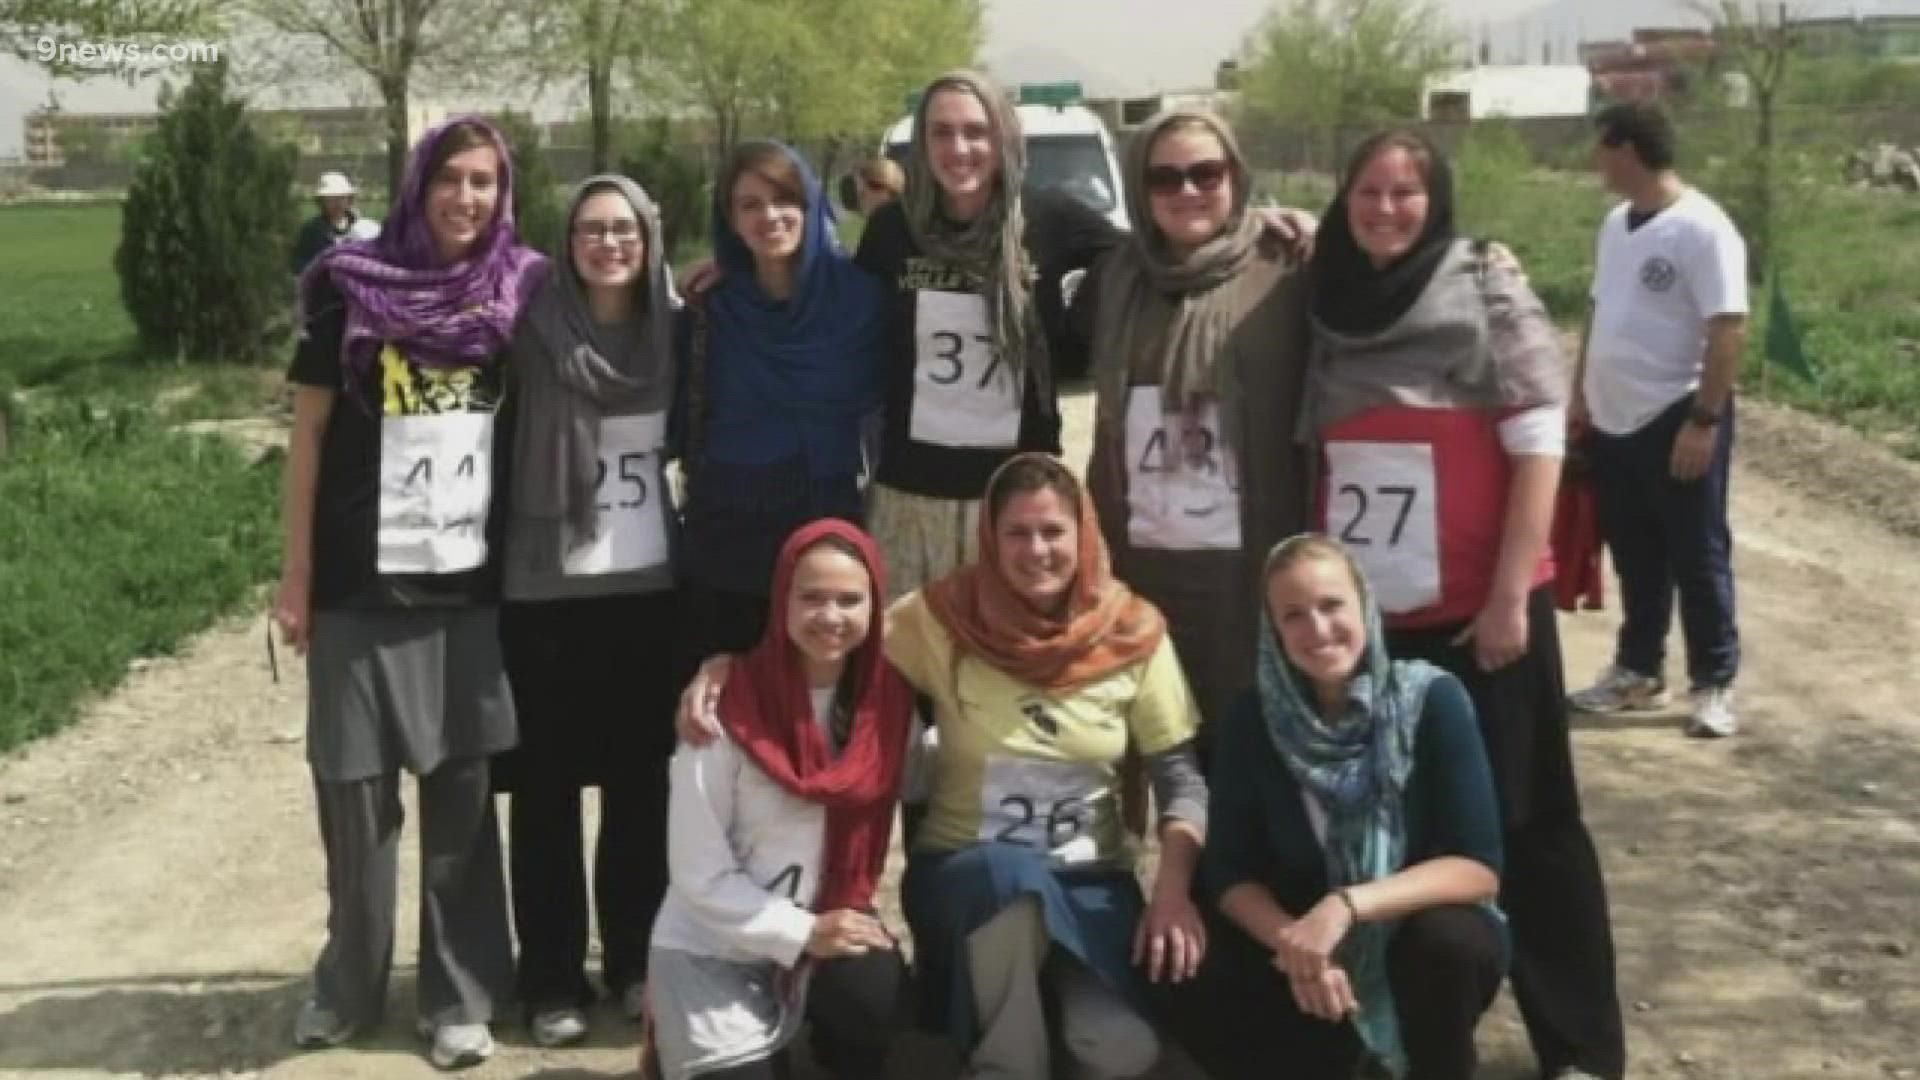 A Denver woman who worked in an international school located in Afghanistan a few years ago is now trying to help families leave the war-torn country.